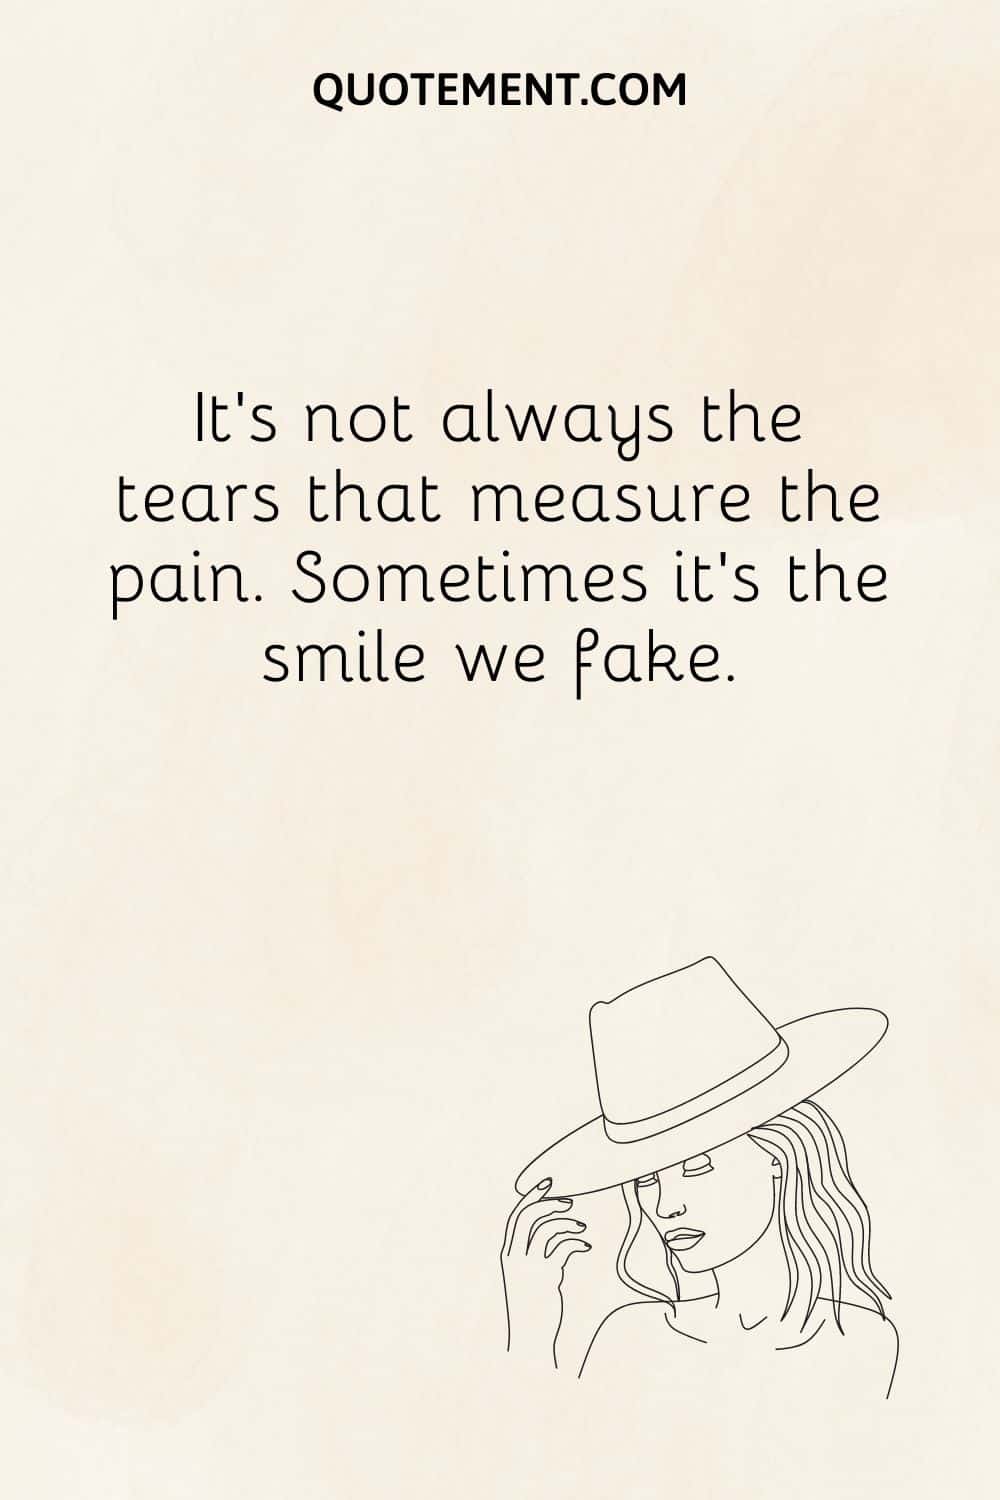 It’s not always the tears that measure the pain. Sometimes it’s the smile we fake.